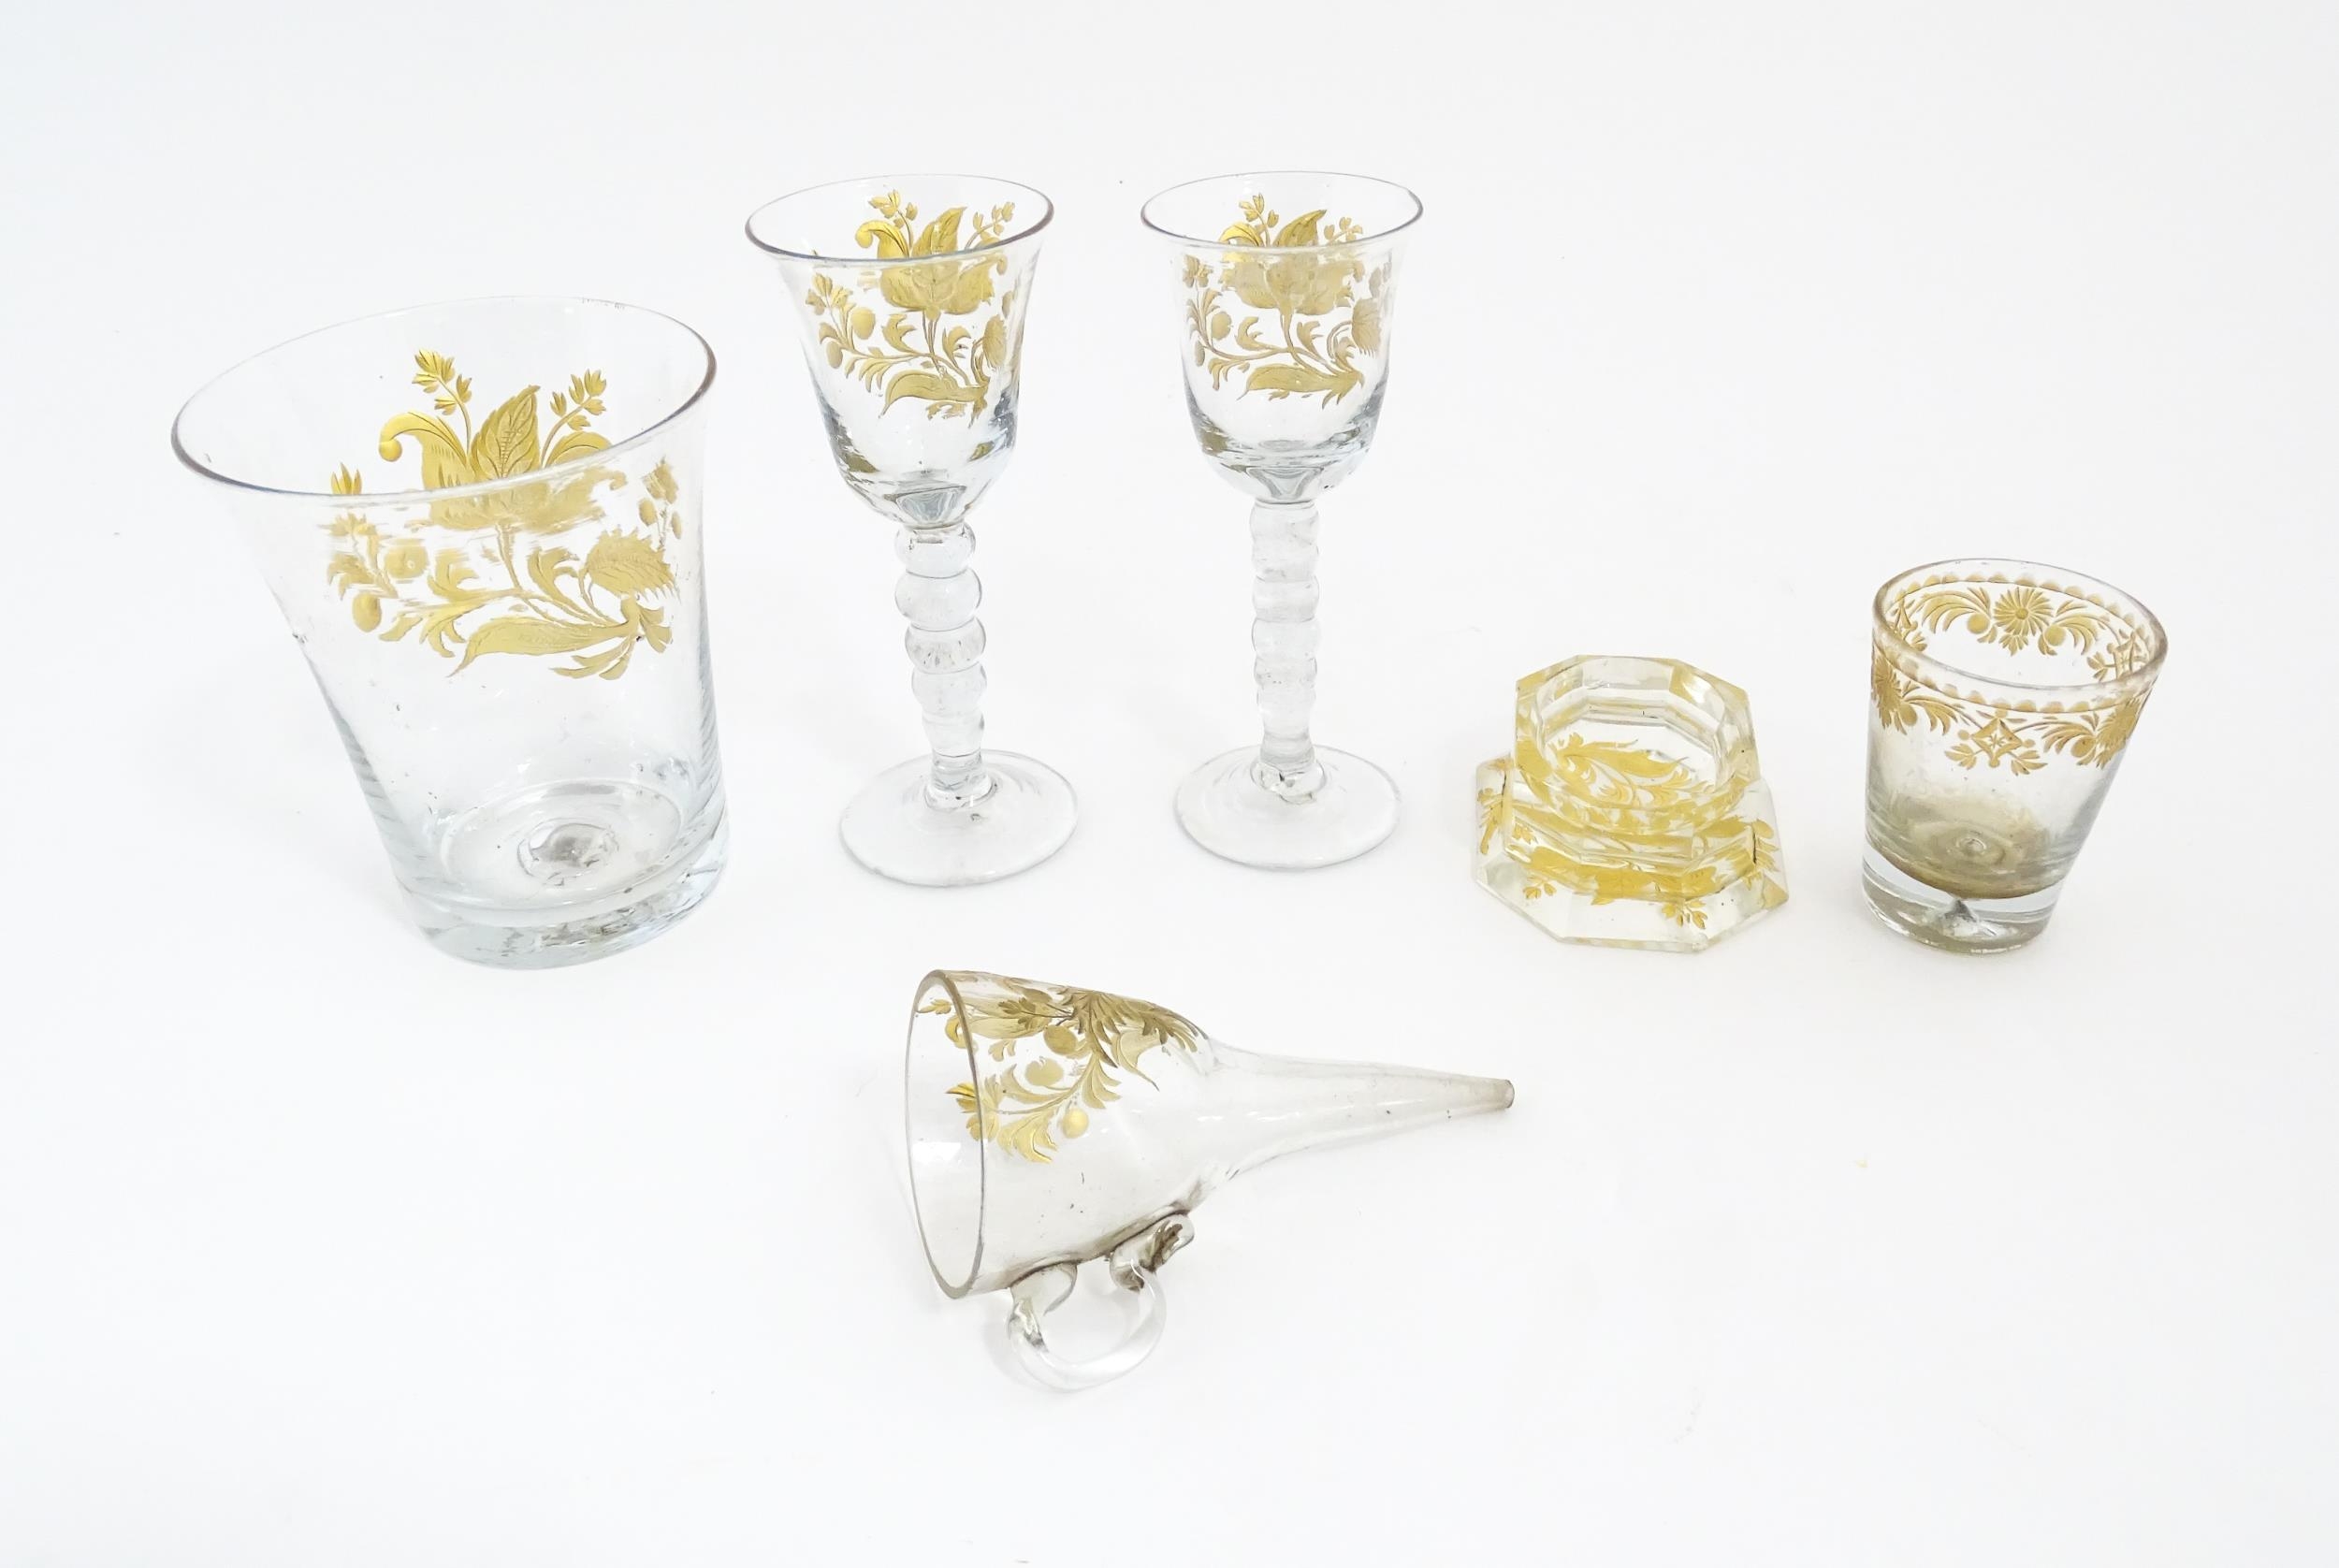 18thC glass to include 18thC wine glasses, beakers, funnel, etc. with engraved gilt foliate and - Image 9 of 11